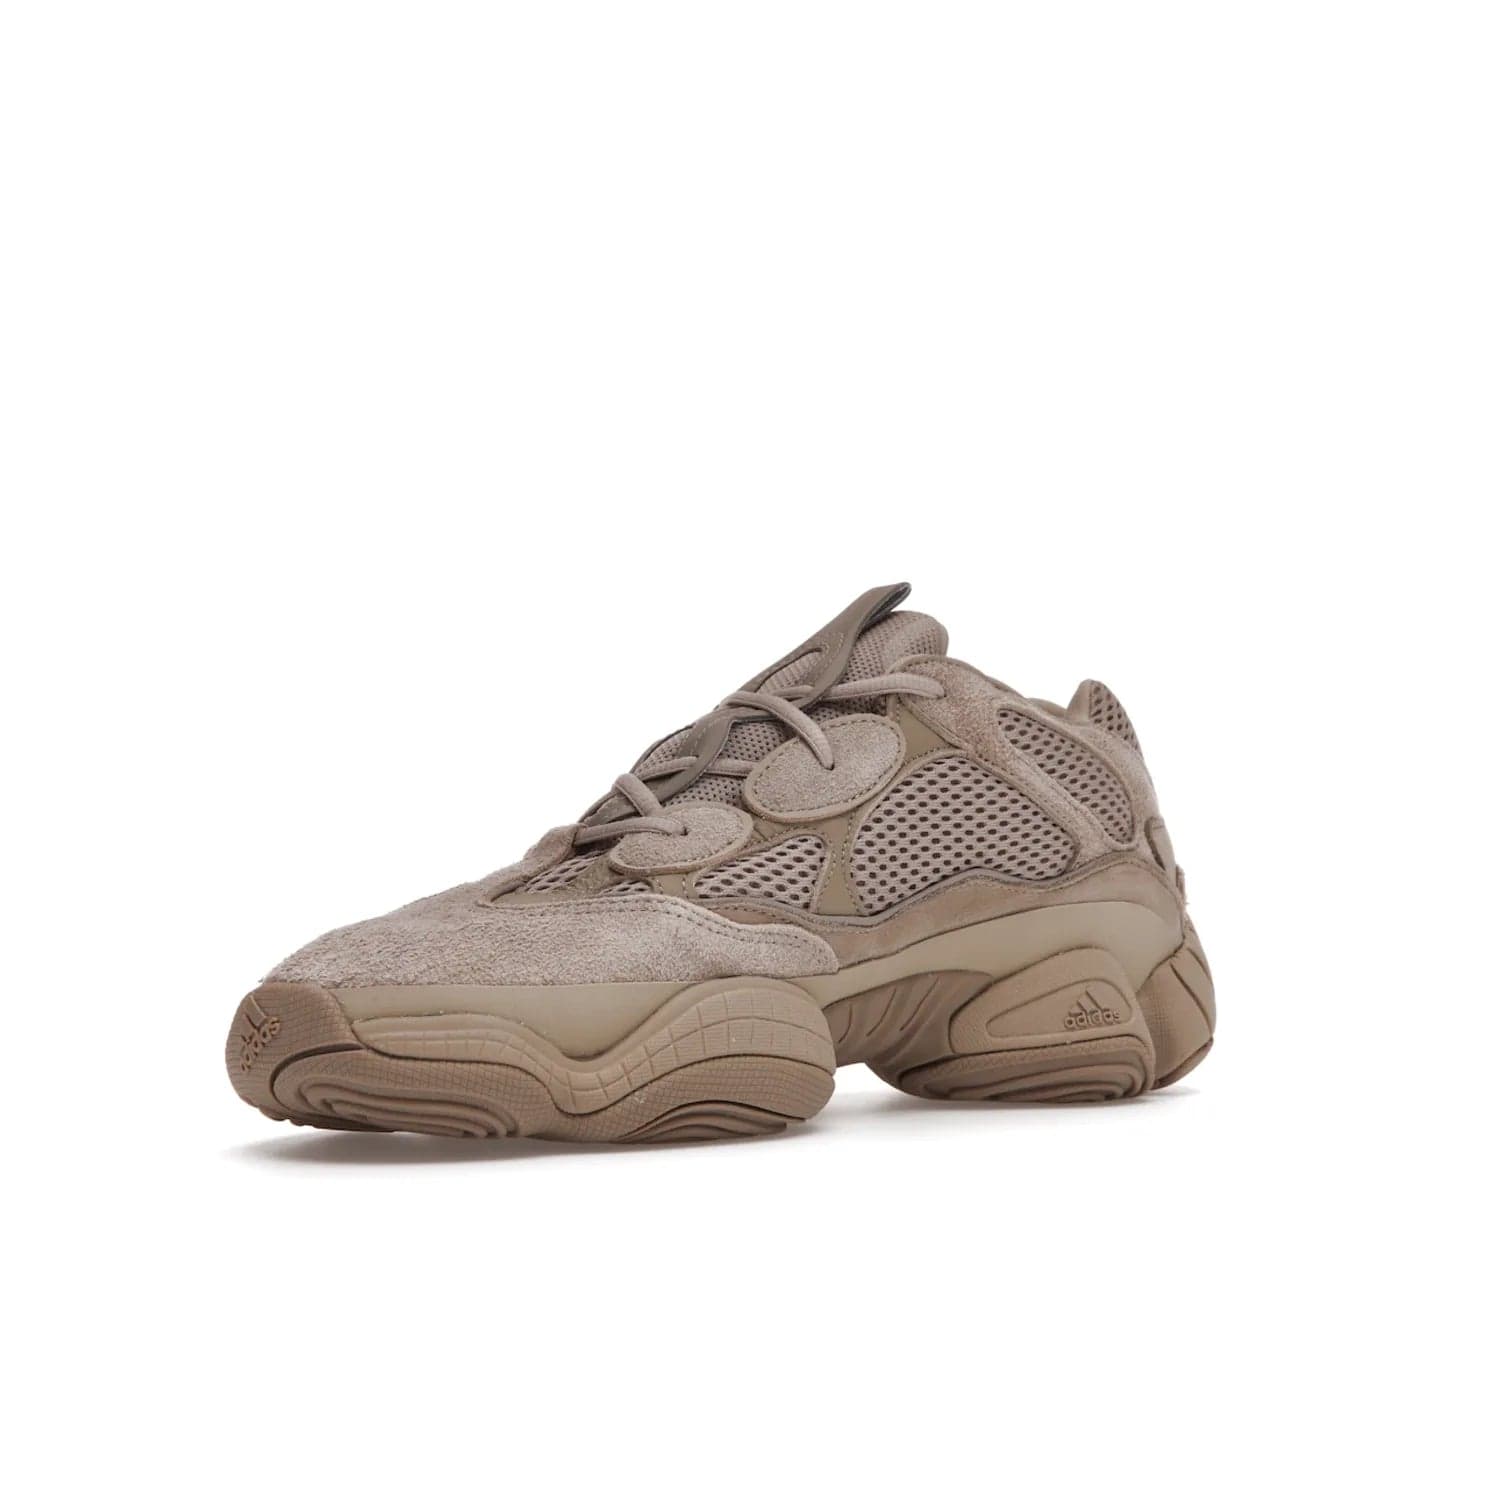 adidas Yeezy 500 Taupe Light - Image 15 - Only at www.BallersClubKickz.com - The adidas Yeezy 500 Taupe Light combines mesh, leather, and suede, with a durable adiPRENE sole for an eye-catching accessory. Reflective piping adds the perfect finishing touches to this unique silhouette. Ideal for any wardrobe, releasing in June 2021.